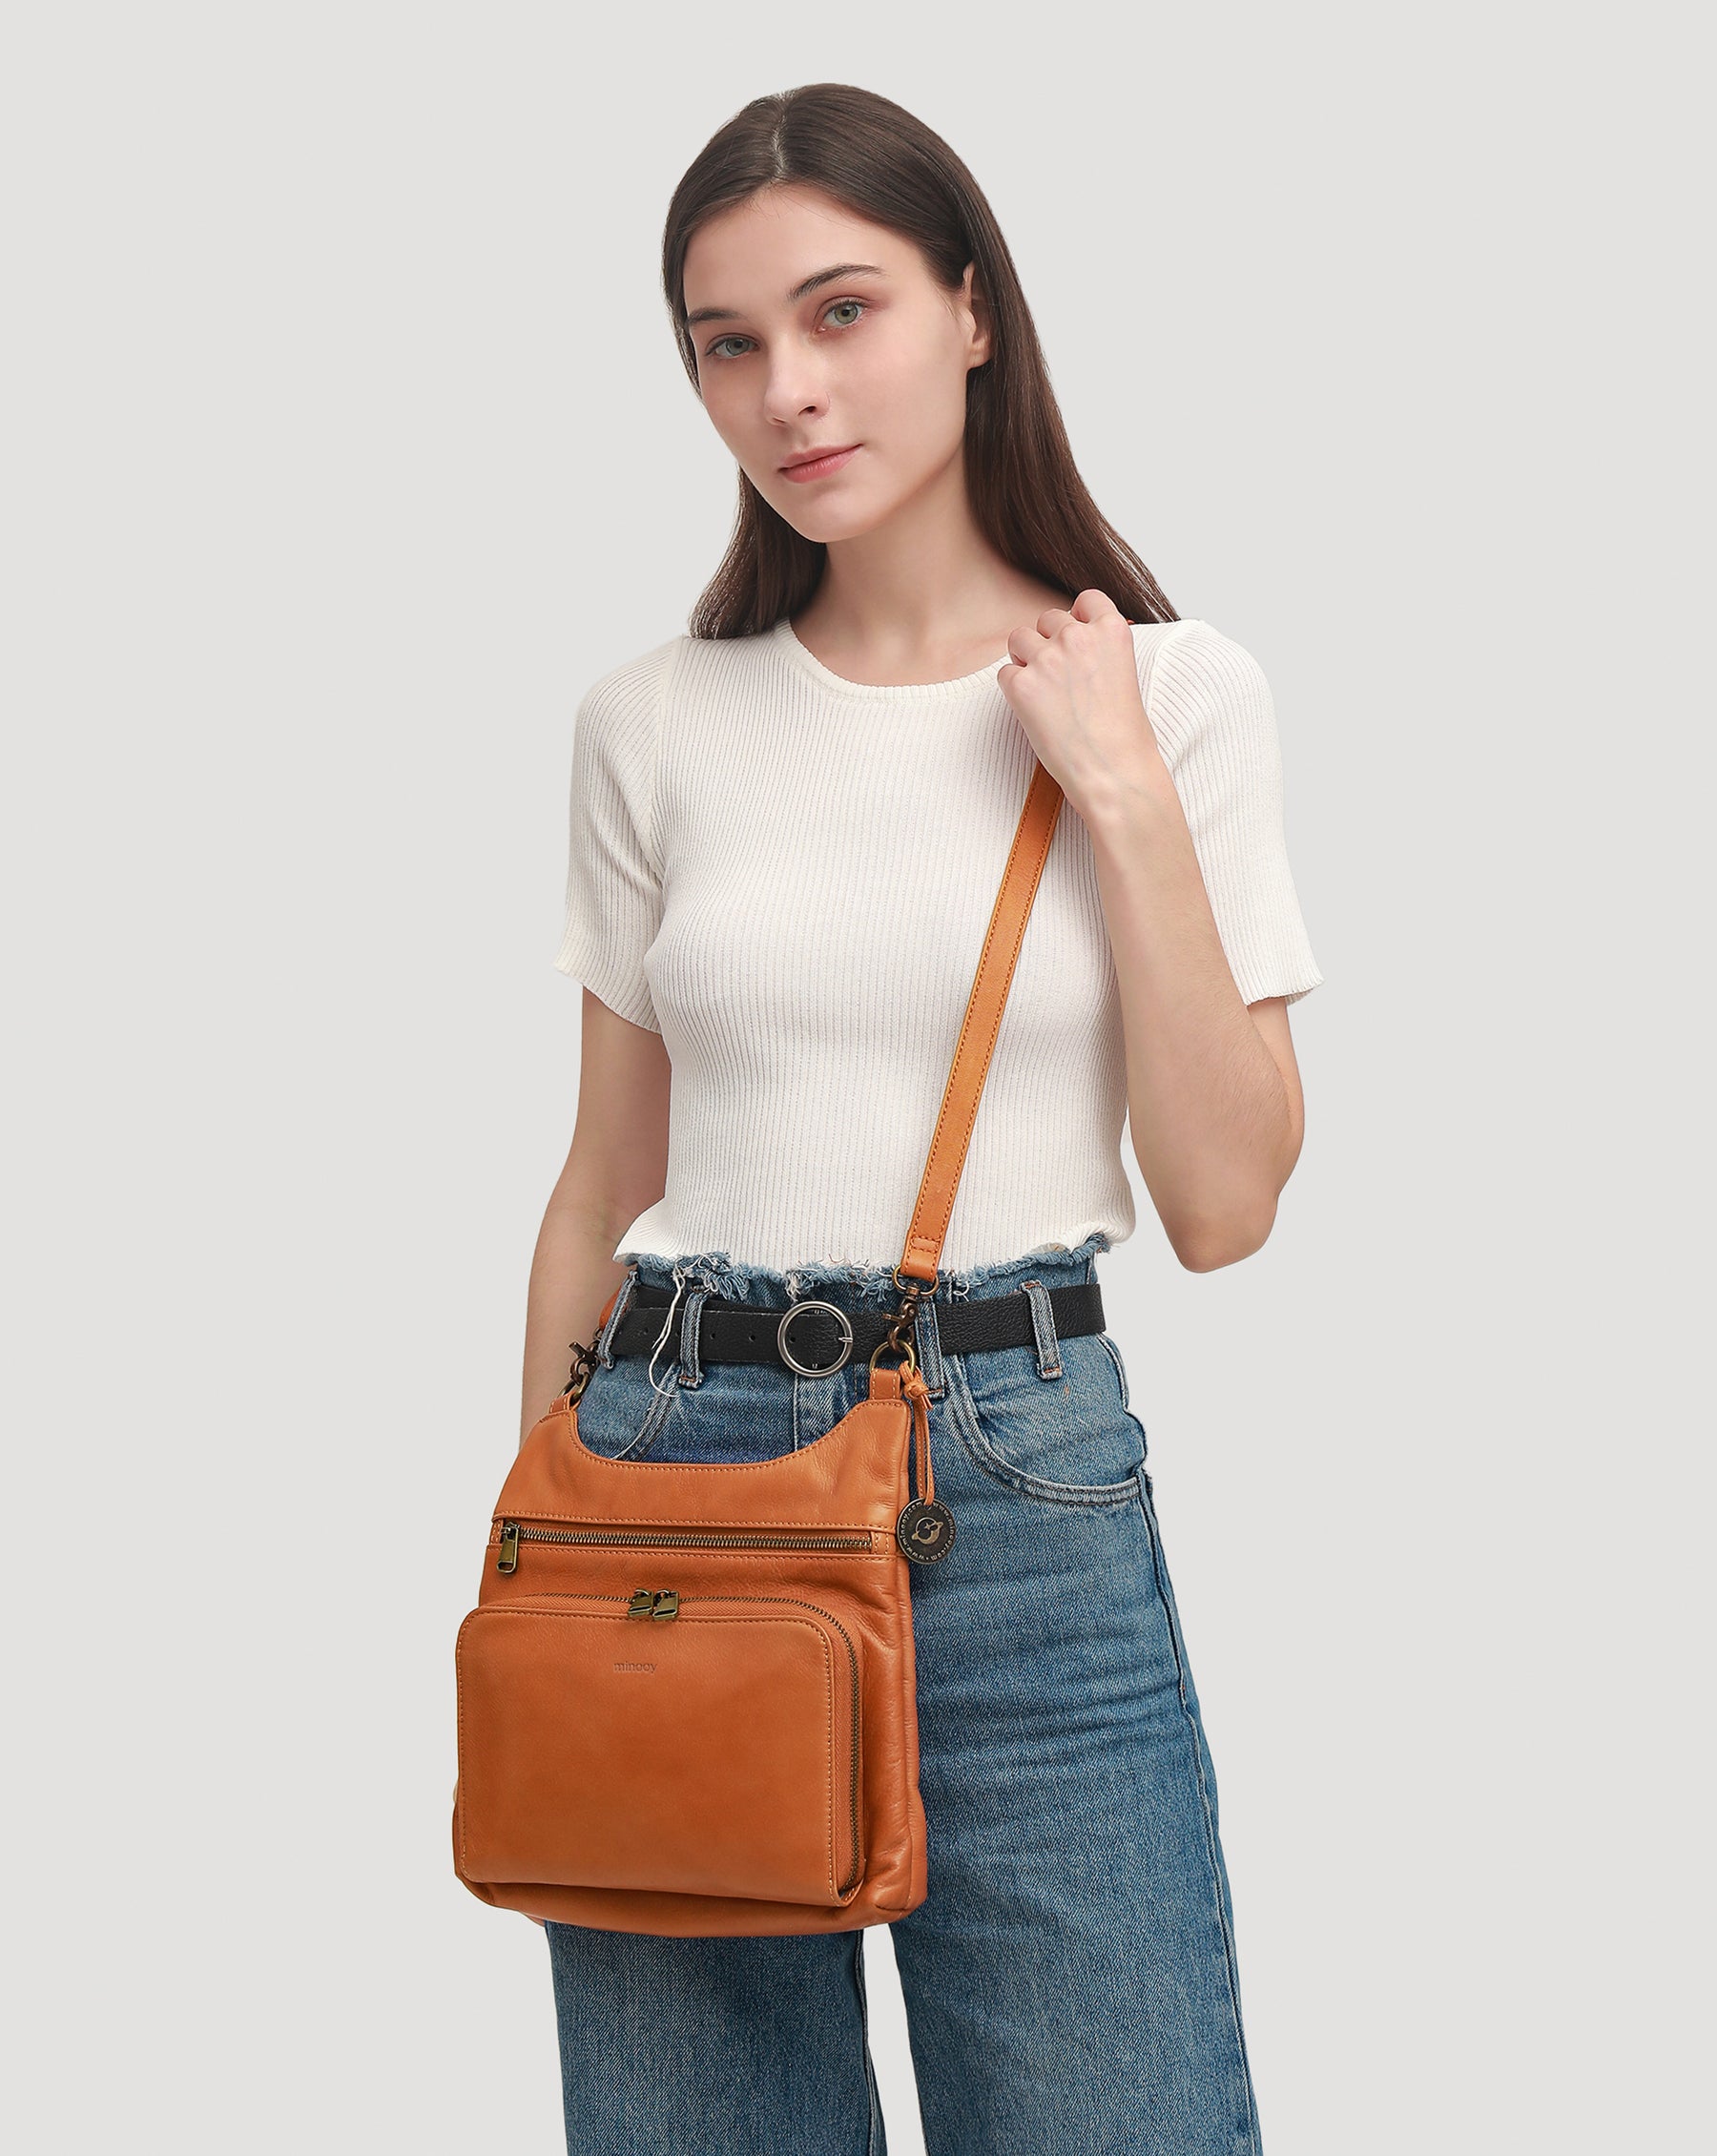 PEDRO Naomie Mini Shoulder Bag Price: MVR 1740 Details - Material: Faux  Leather Lining: PU Height (mm): 135 Width (mm): 230 Depth (mm):…